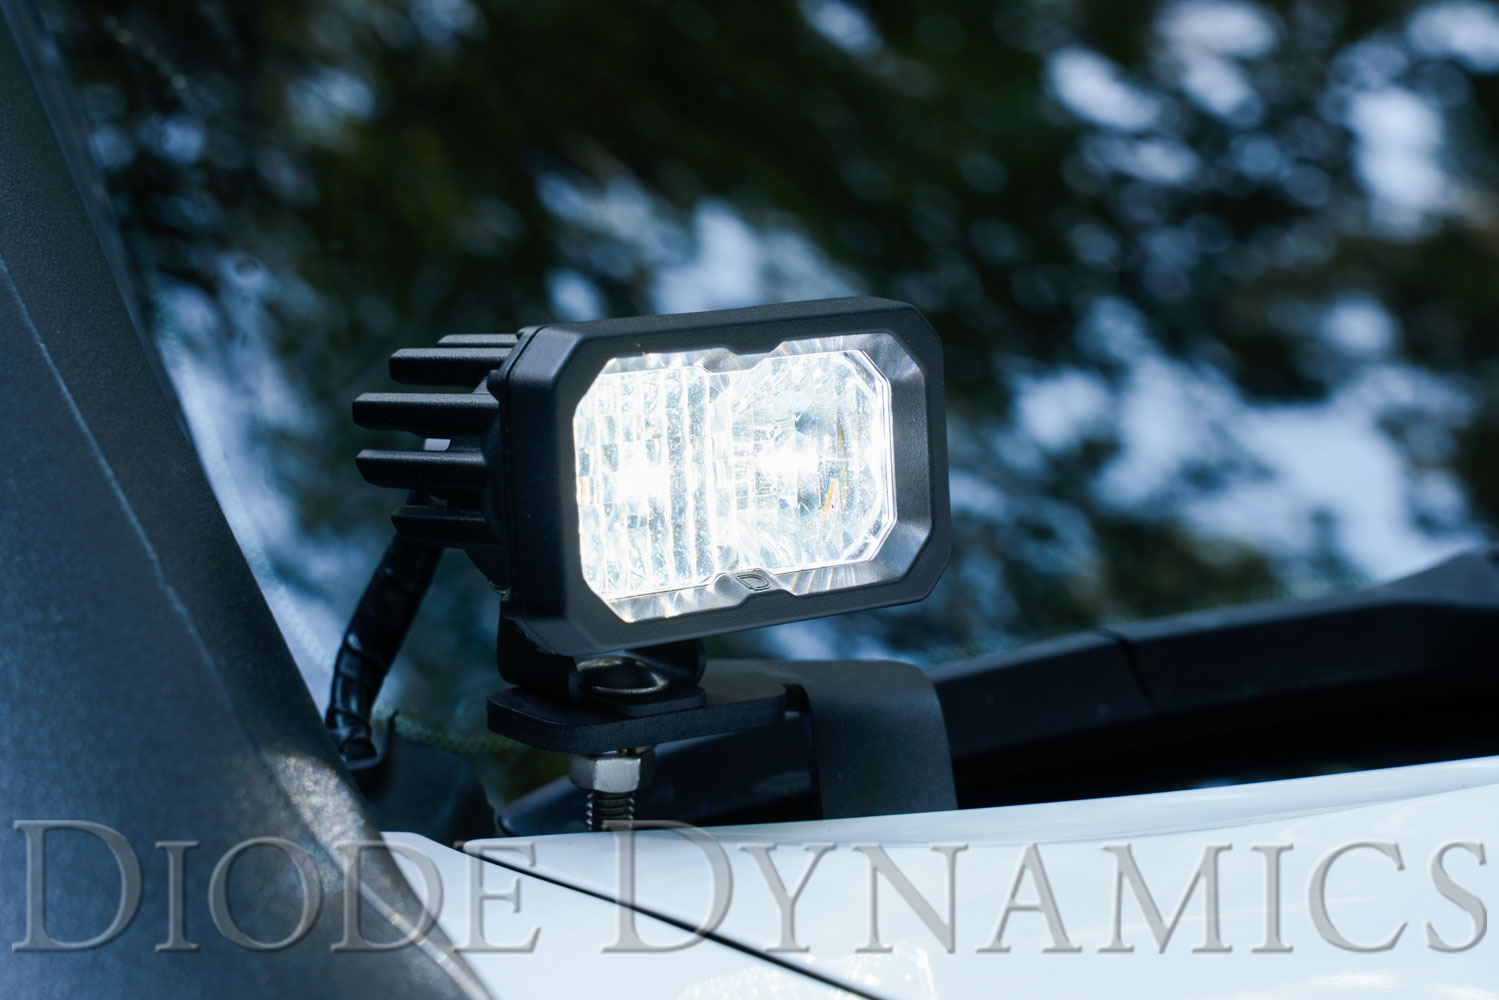 Diode Dynamics Stage Series 2 Inch LED Pod, Sport White Driving Standard ABL Each - Click Image to Close